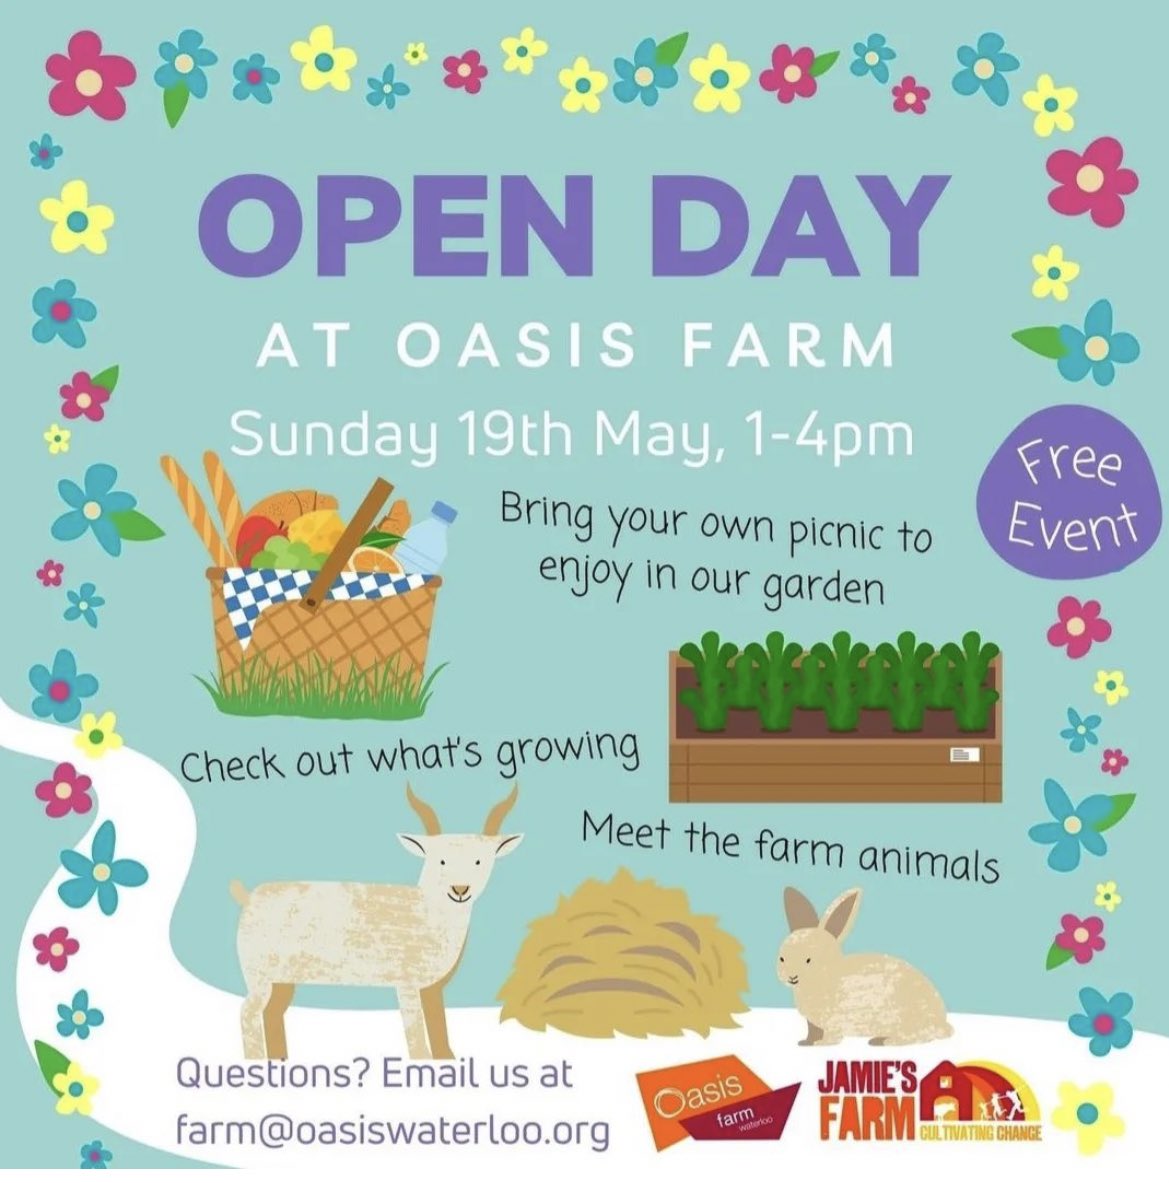 OPEN DAY AT OASIS FARM Oasis Farm invites everyone to their Open Day today, May 19th, from 1-4pm! 🌞 With great weather, it's the perfect time to bring a picnic and enjoy the garden. 🧺🌻 Visitors can meet the farm animals and explore what's growing 🐓🌿 #CommunityEvent #FarmFun